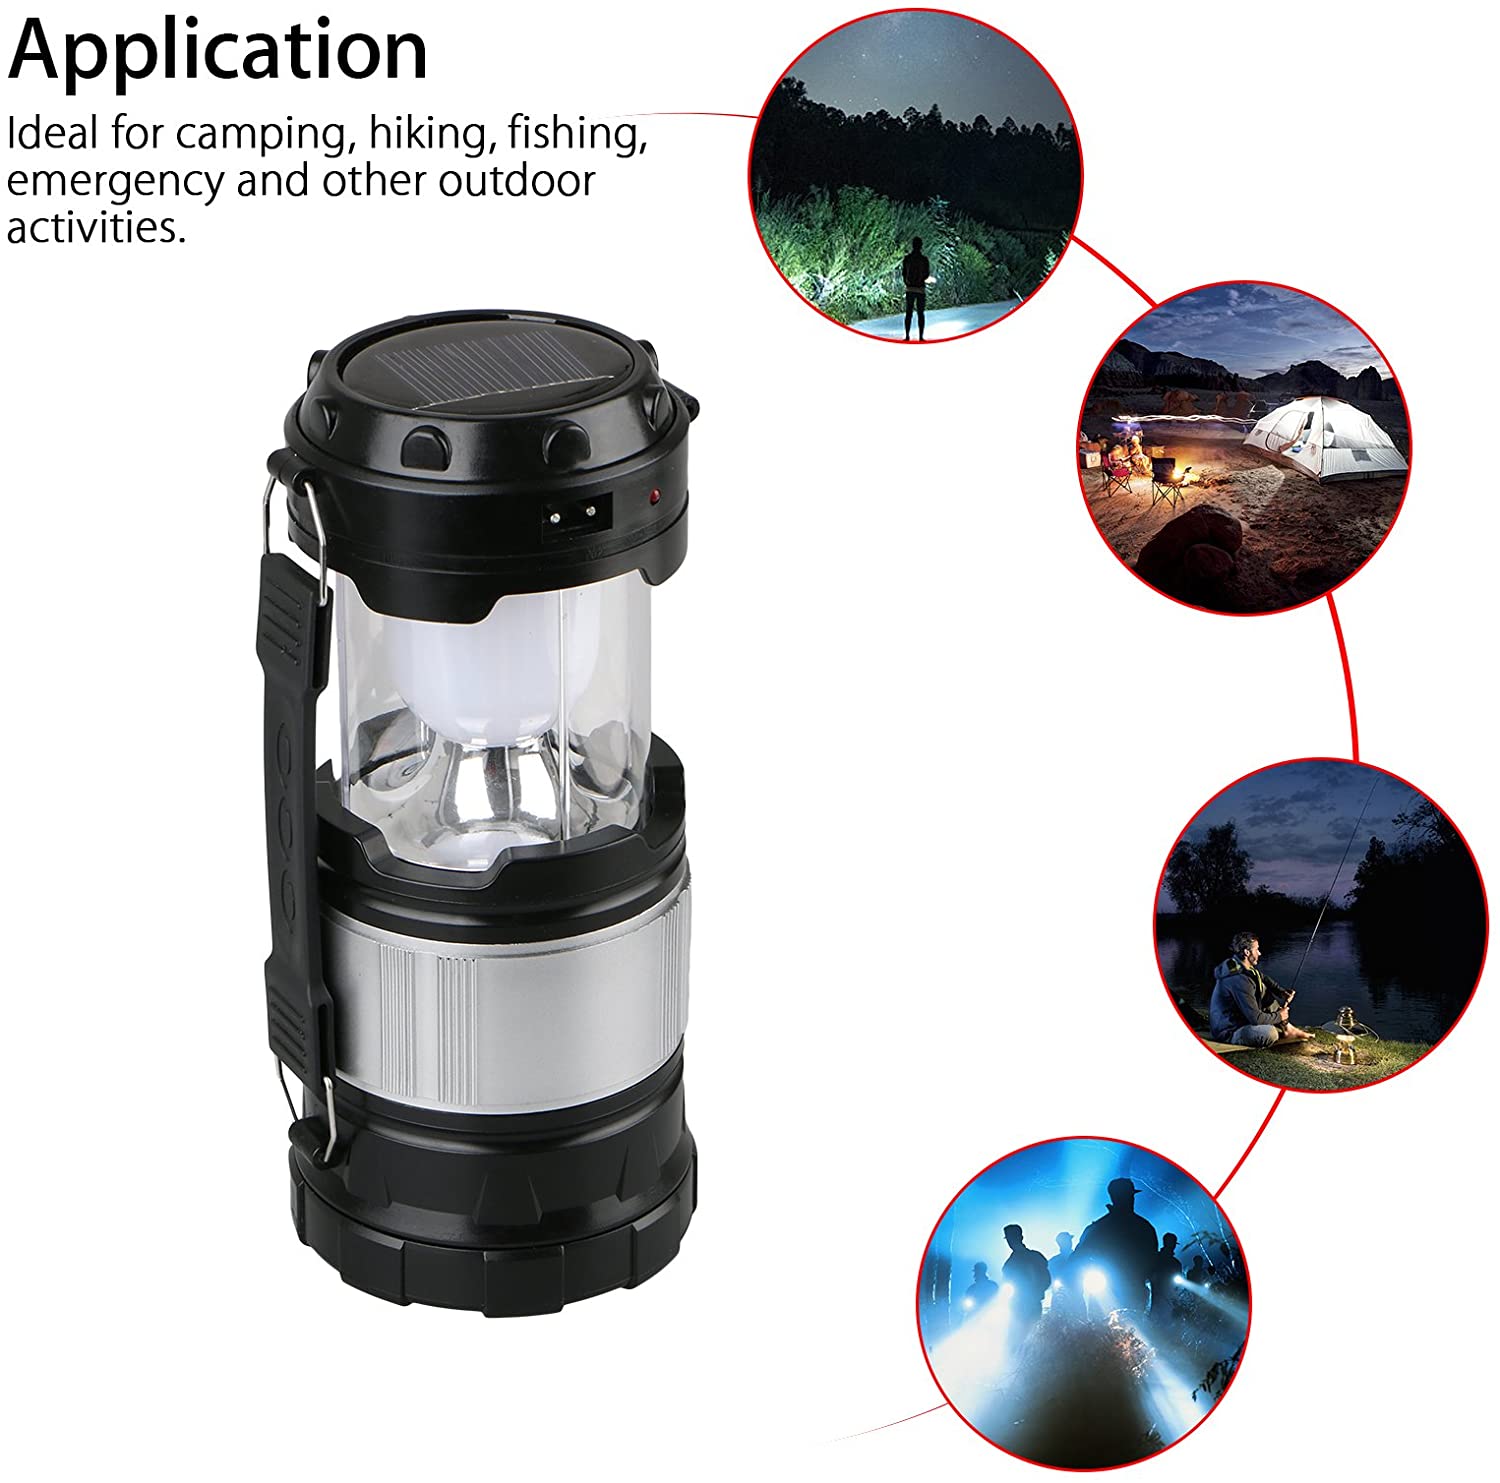 Luvan Camping String Lights, 2 in 1 String Lights with 8 Adjustable Modes,  LED Camping Lantern Rechargeable, 2000mAh IPX4 Portable Camping Lights for  Camping, Hiking, Tent, Christmas Decor(1Pcs) 